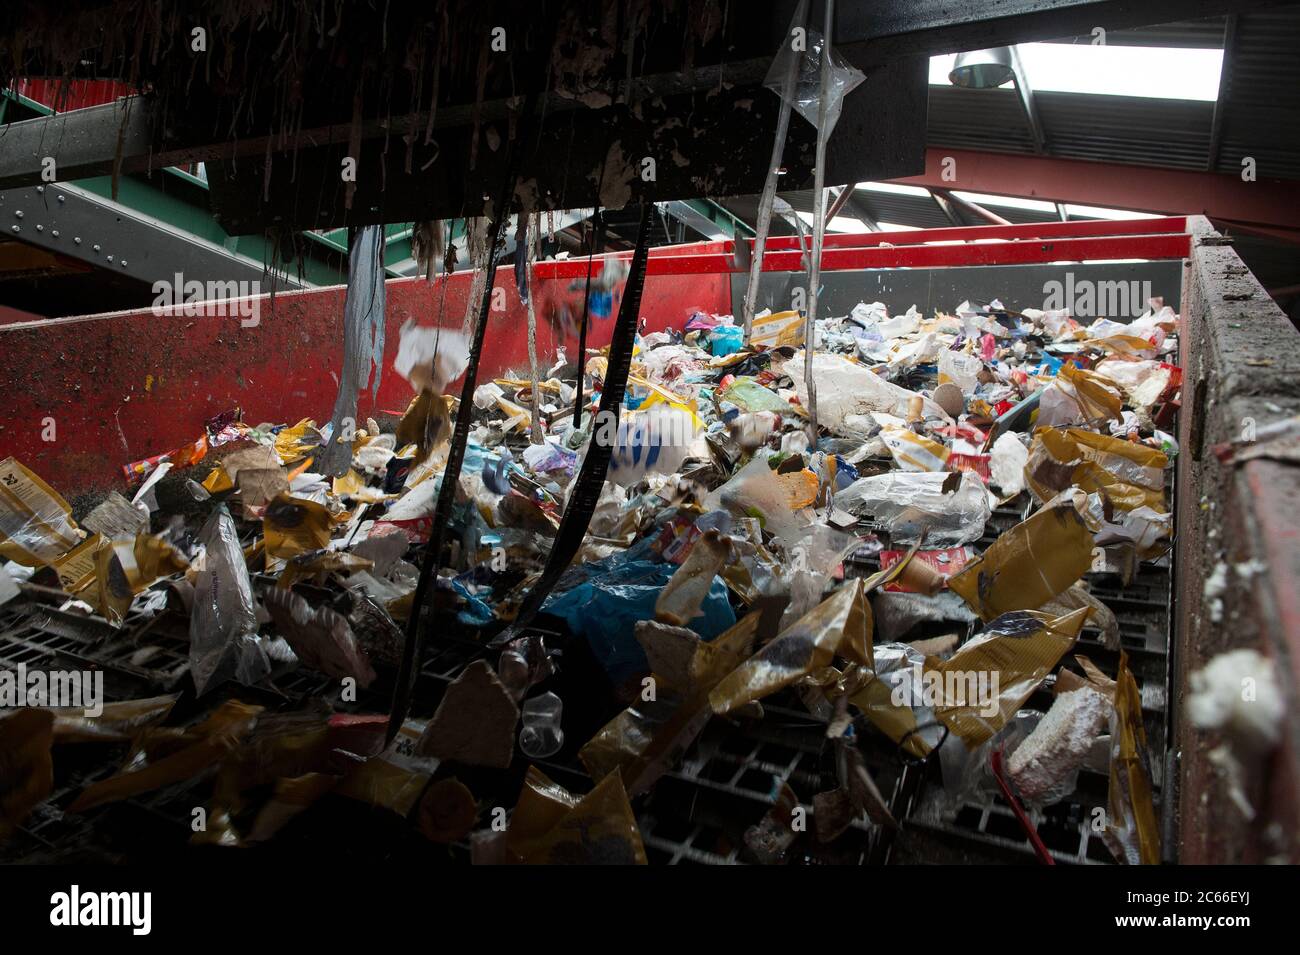 Recycling material being sorted at a recycling centre in Liverpool, England. Stock Photo